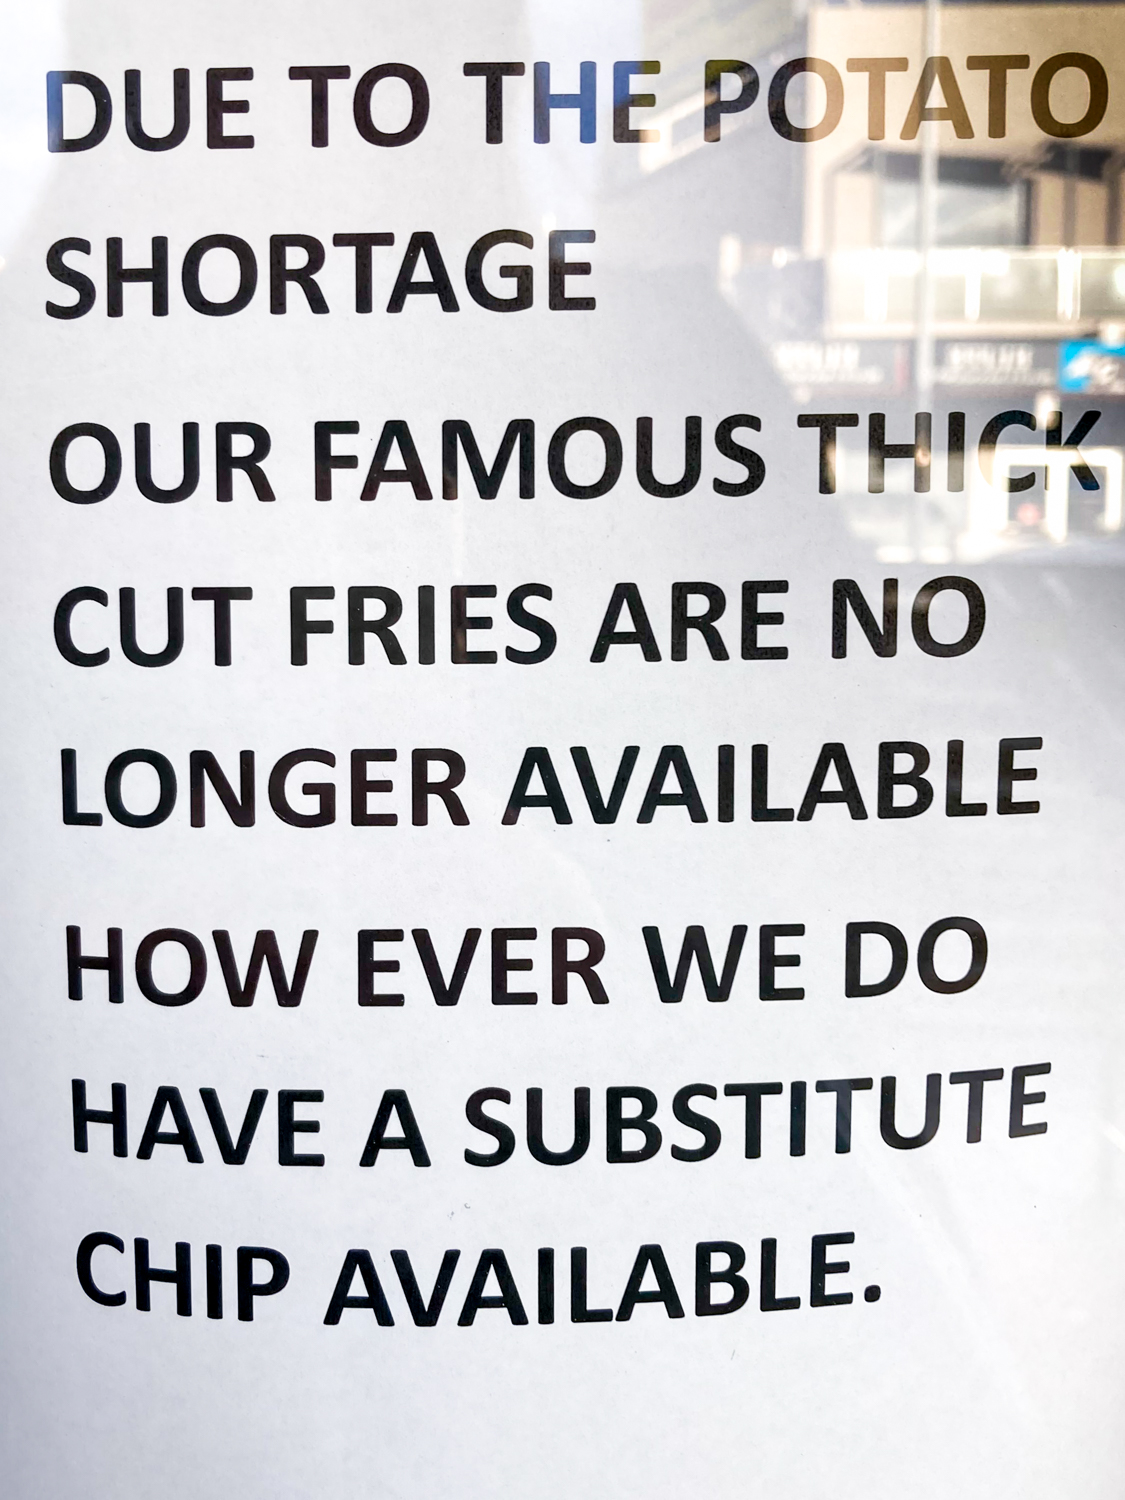 a black and white sign advising that thick cut fries are not available due to the potato shortage but that there is a substitute chip available